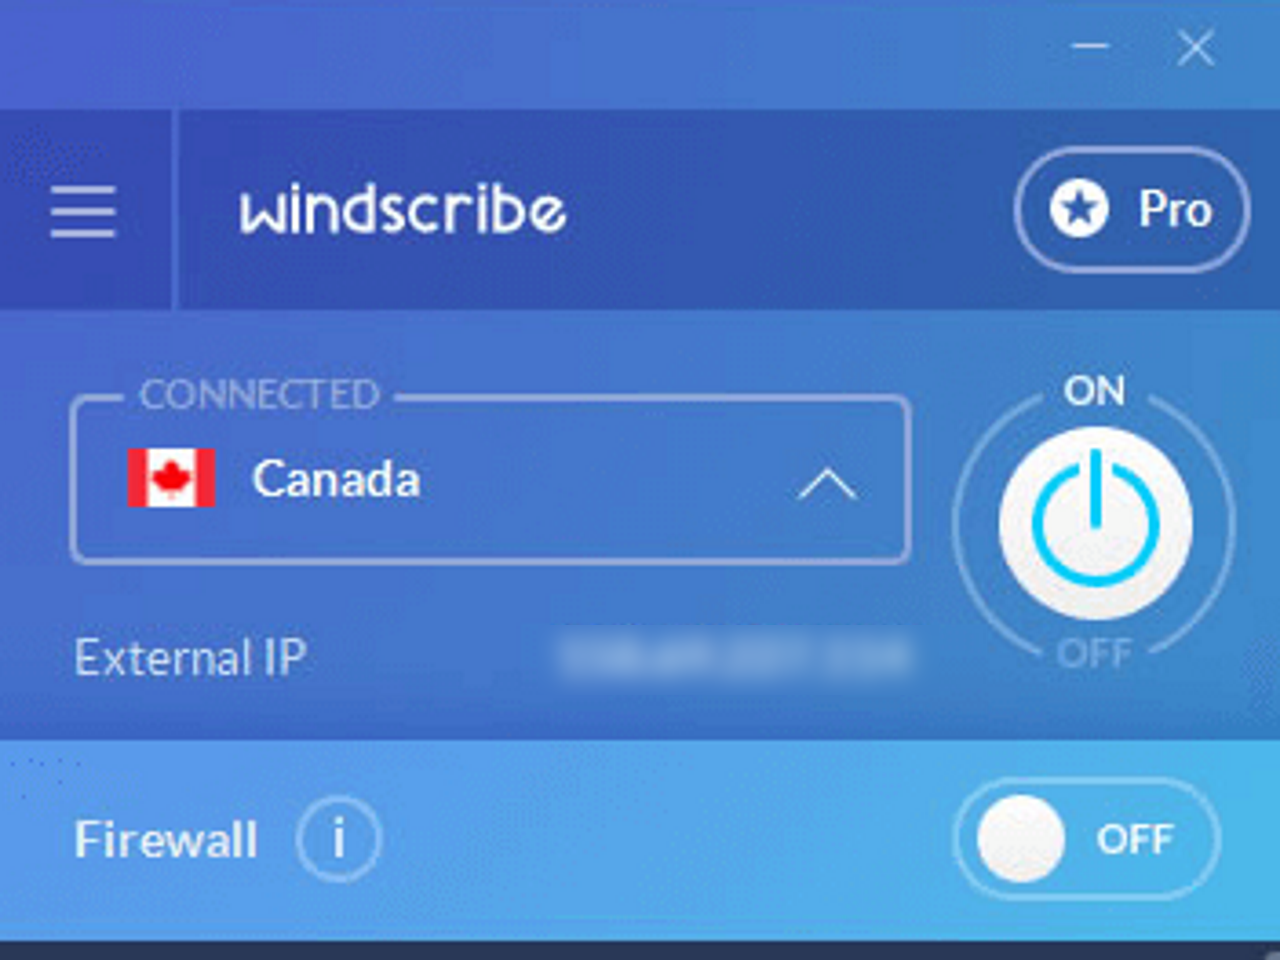 Windscribe’s delightfully simple interface, with its server drop-down menu